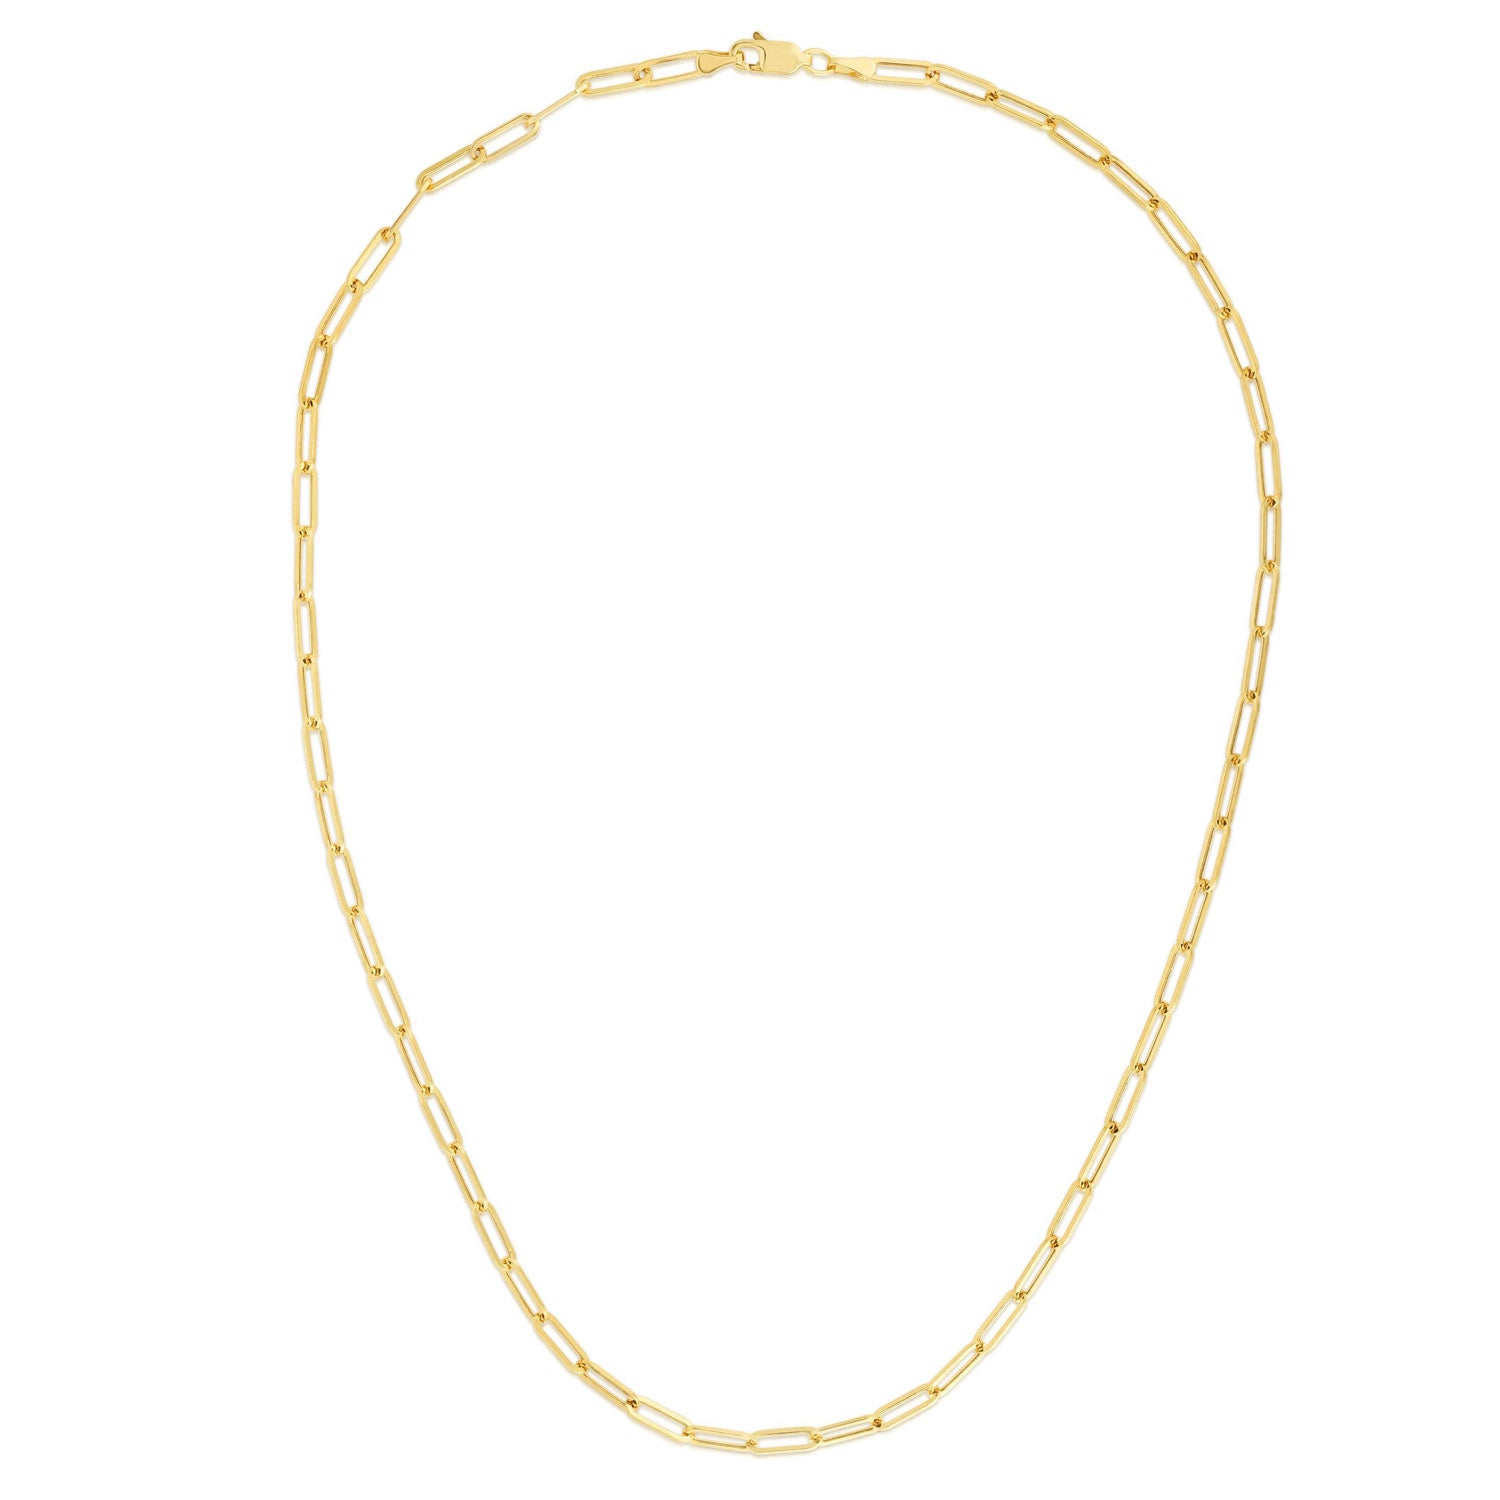 Paperclip Link Chain in 14kt Yellow Gold (24 inches and 3.3mm wide)